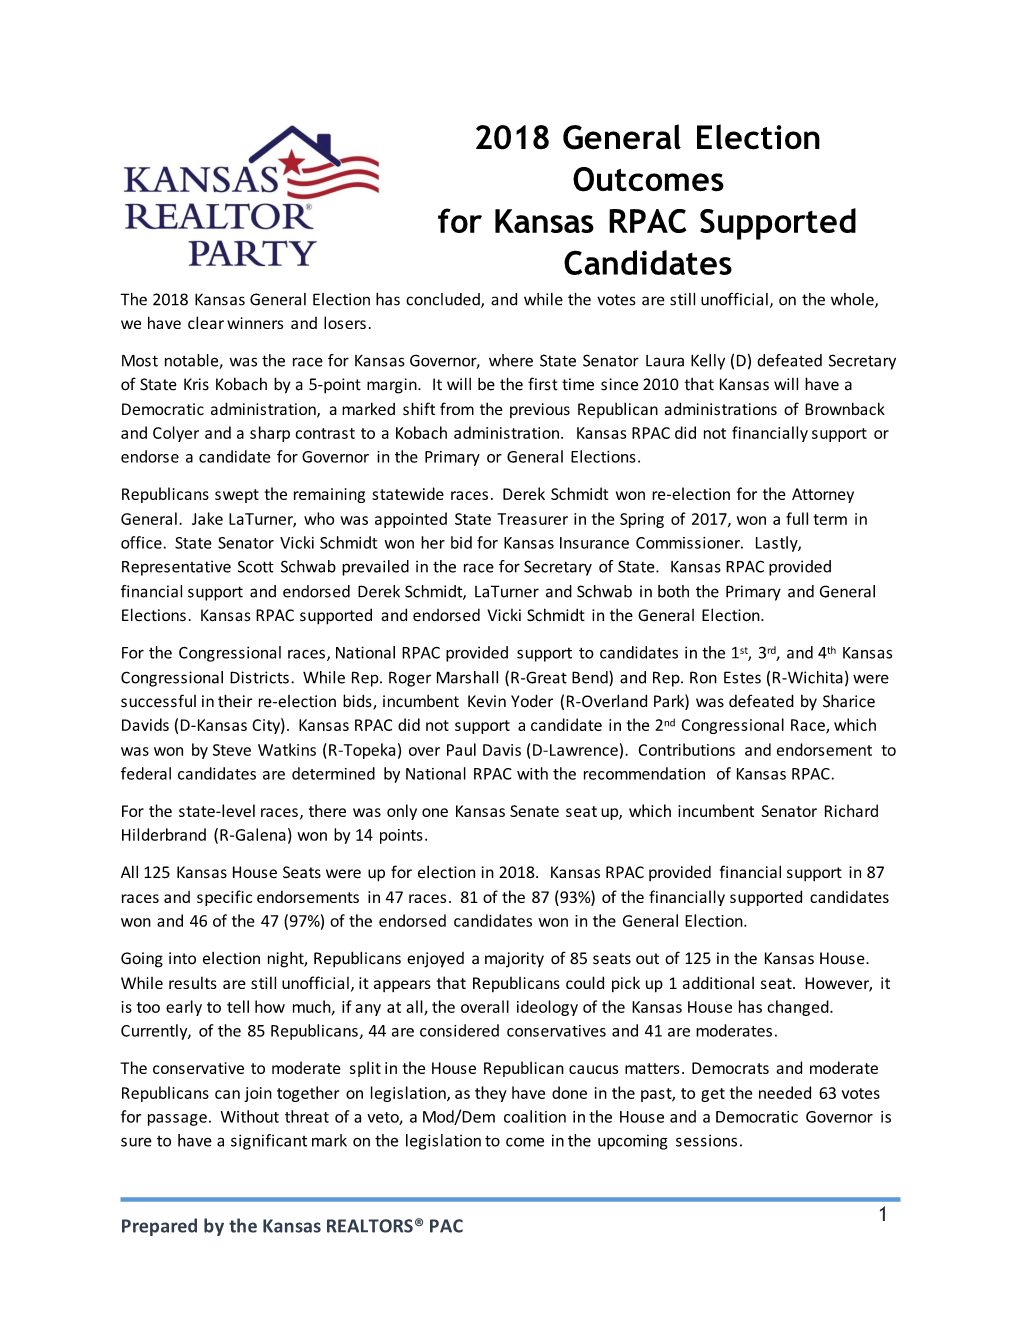 2018 General Election Outcomes for Kansas RPAC Supported Candidates